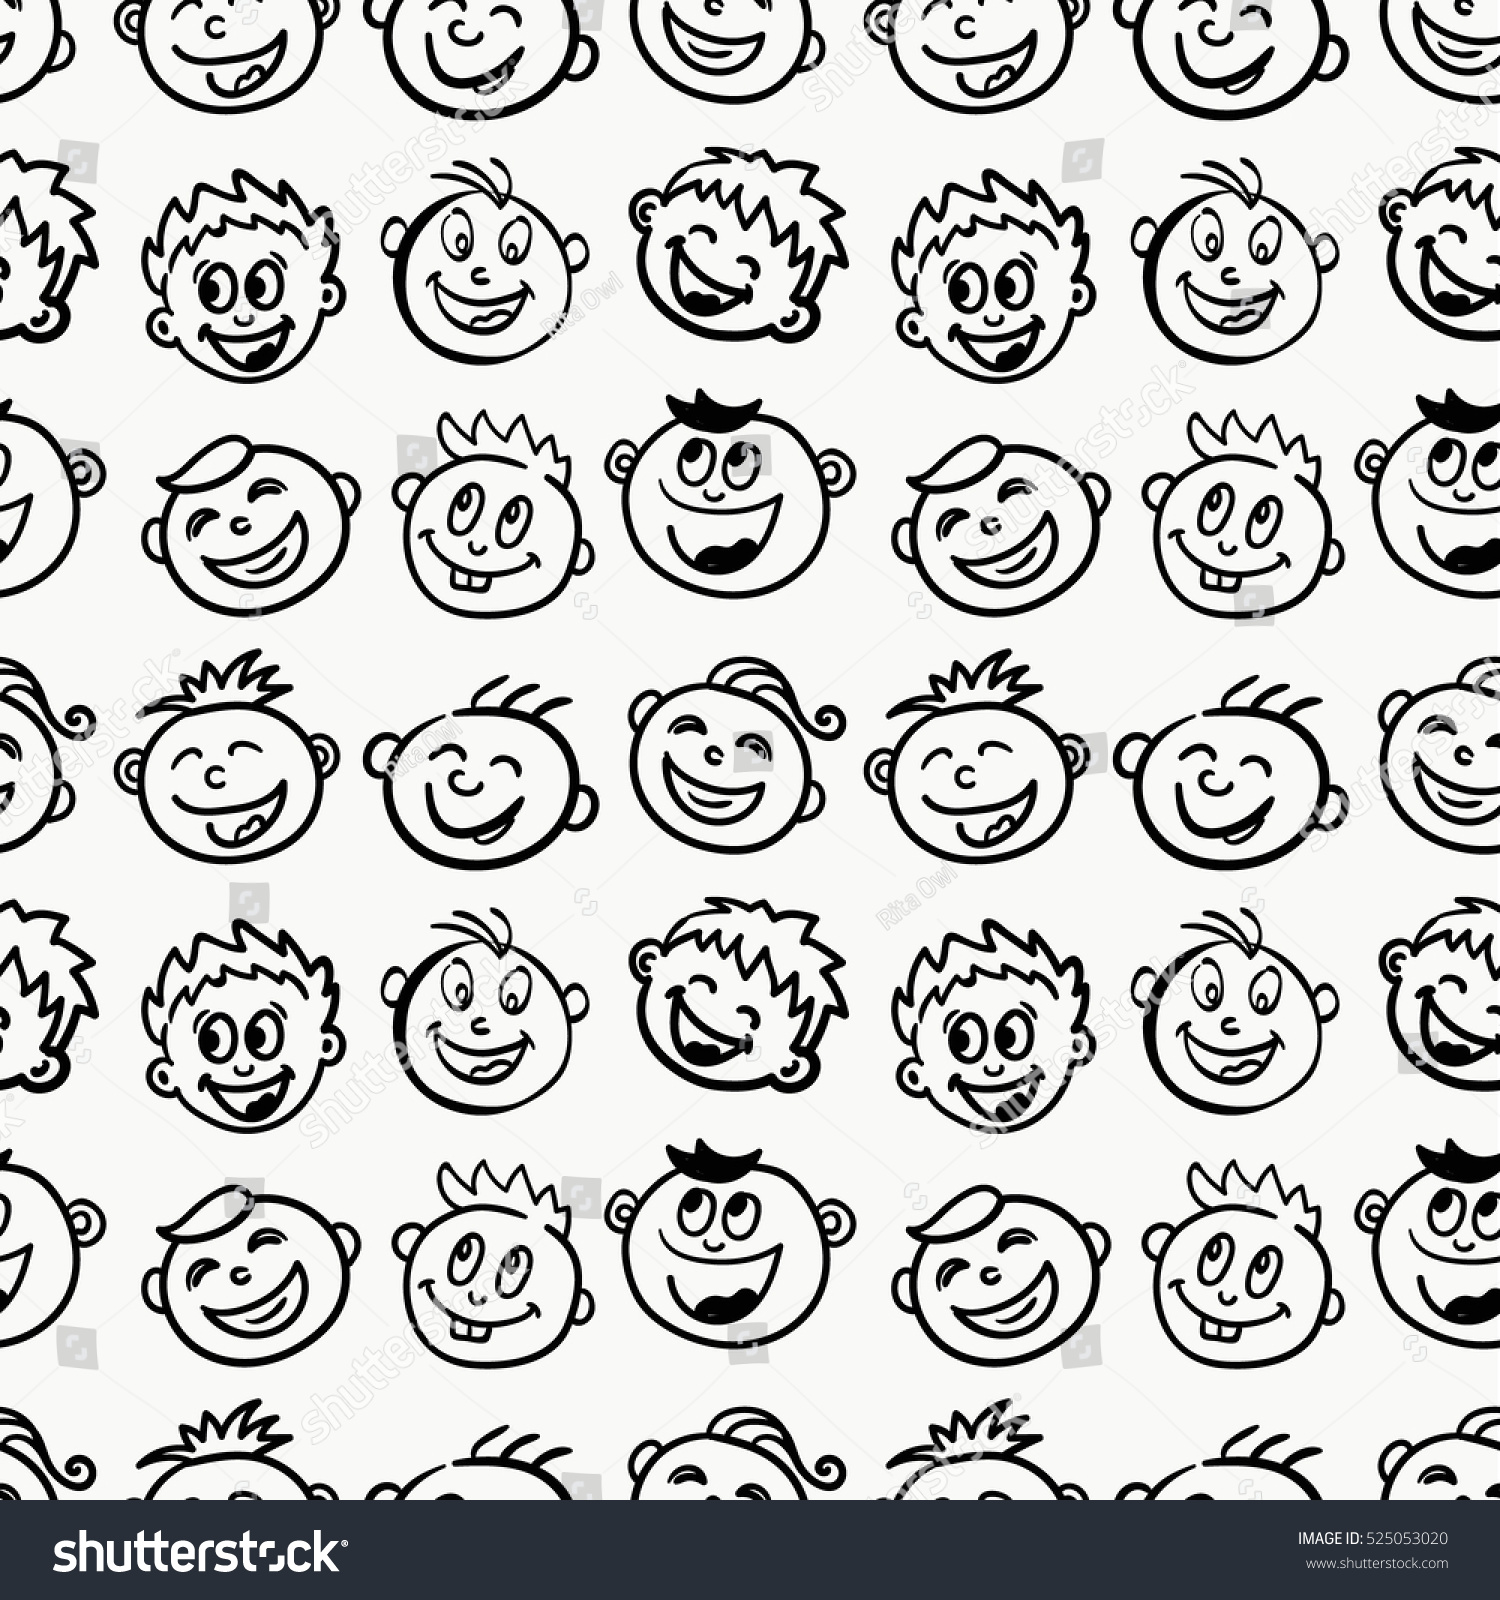 Smiling Kids Seamless Vector Pattern In Hand-Drawn Style. Happy Smiling ...